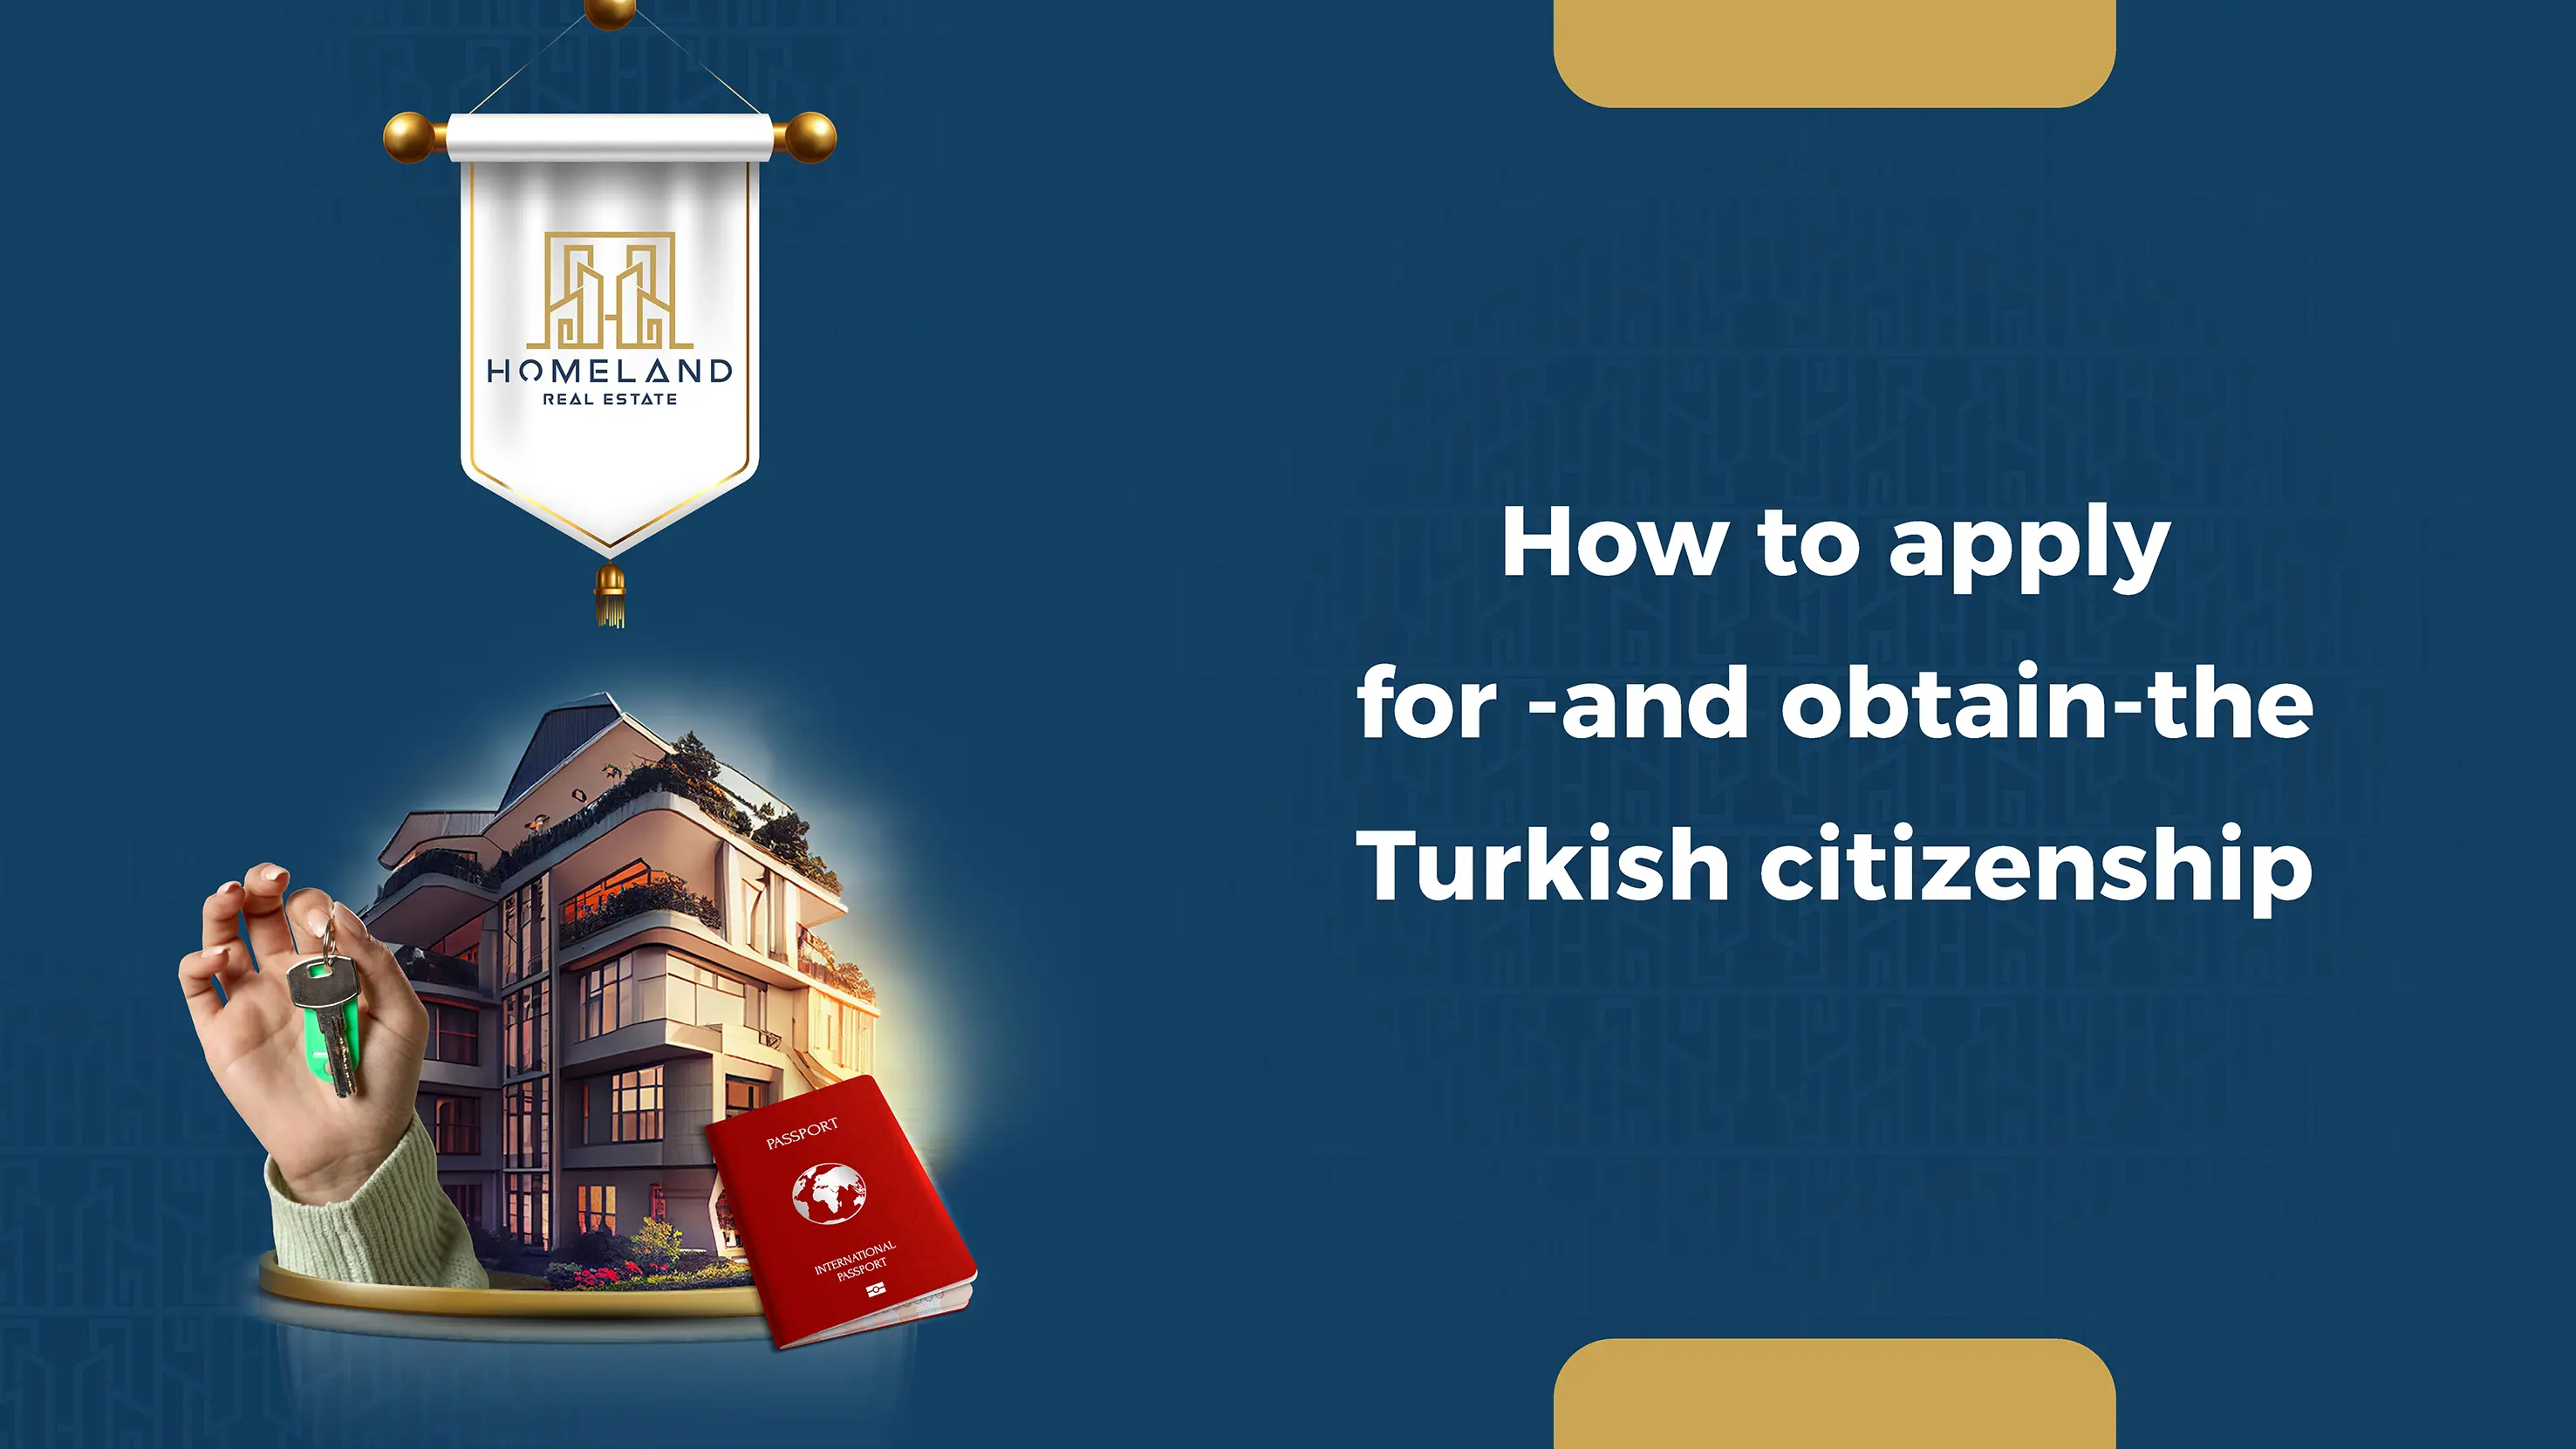 Steps to Apply for and Obtain the Turkish Citizenship